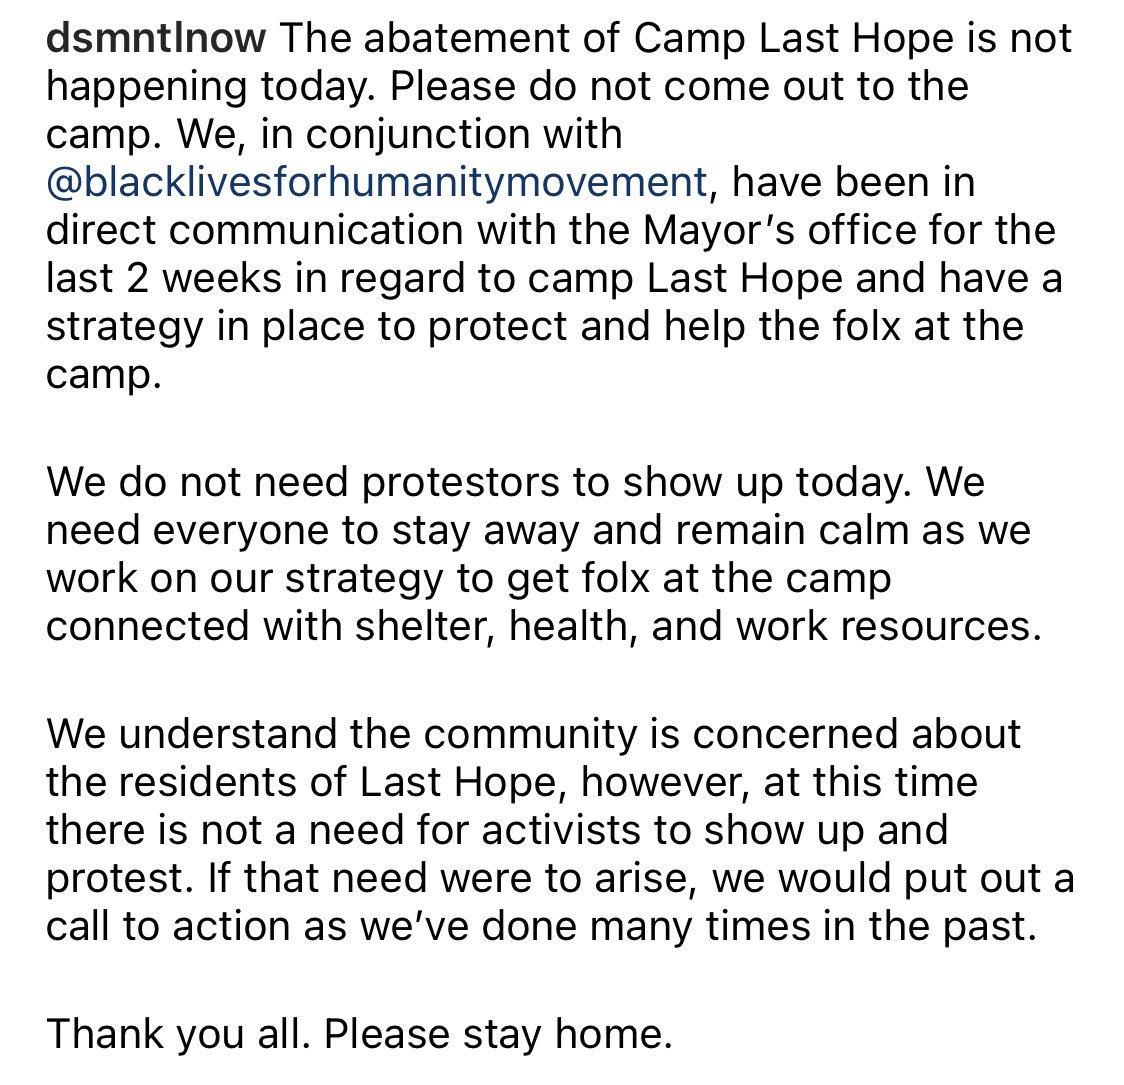 DSMNTL posted this on instagram this morning, and I am.....having a lot of thoughts and feelings about the casual admission of coordinating with the mayor’s office. not to mention co-opting and erasing the work of other groups